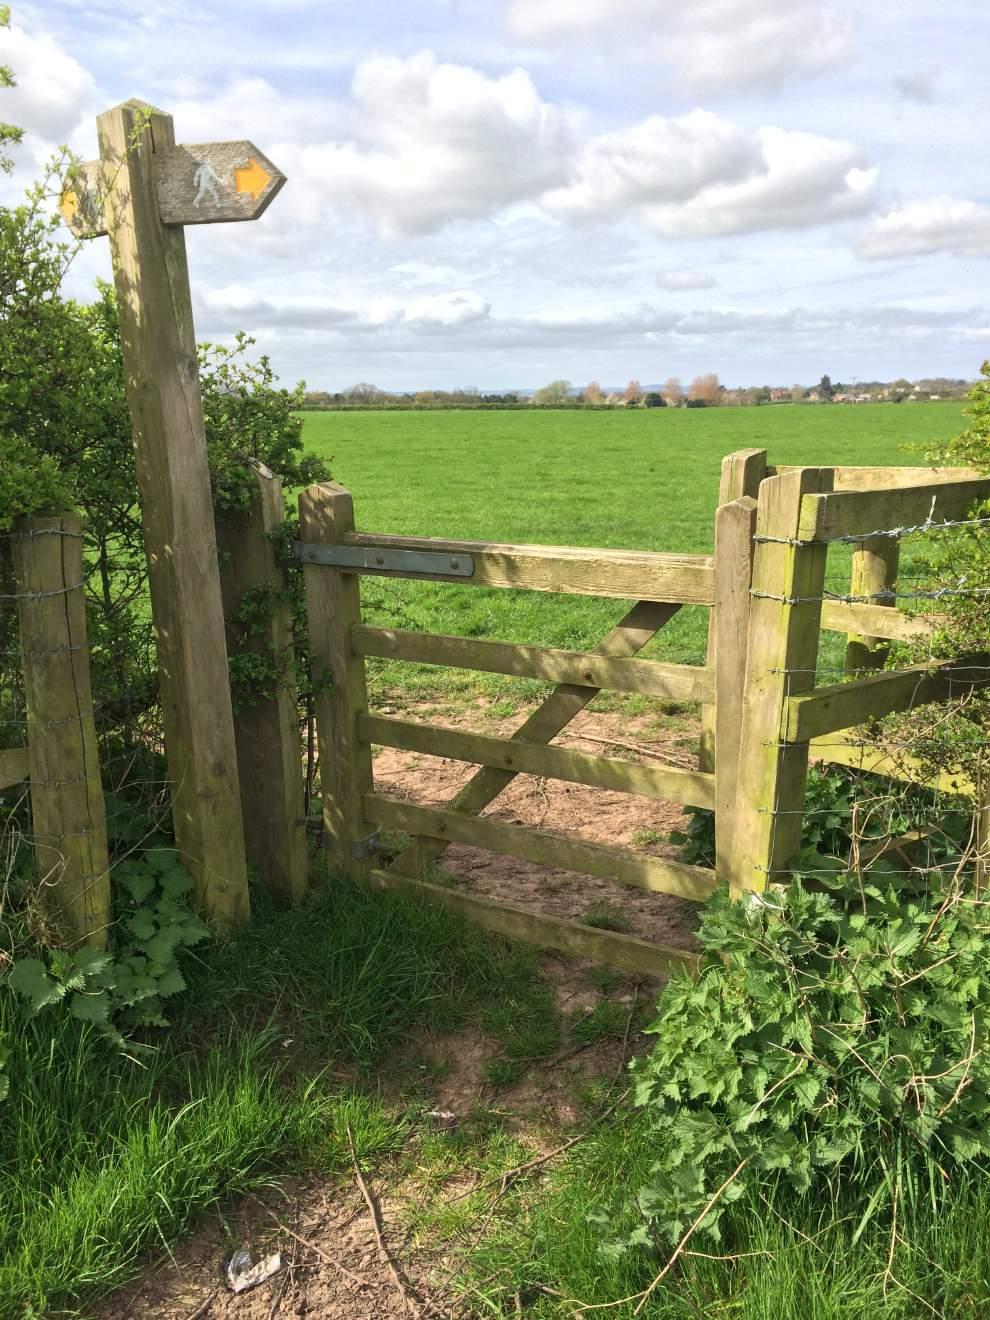 This route begins at The Partridge, and will take you across ﬁelds and through the village of Higher Whitley before returning to your starting point.